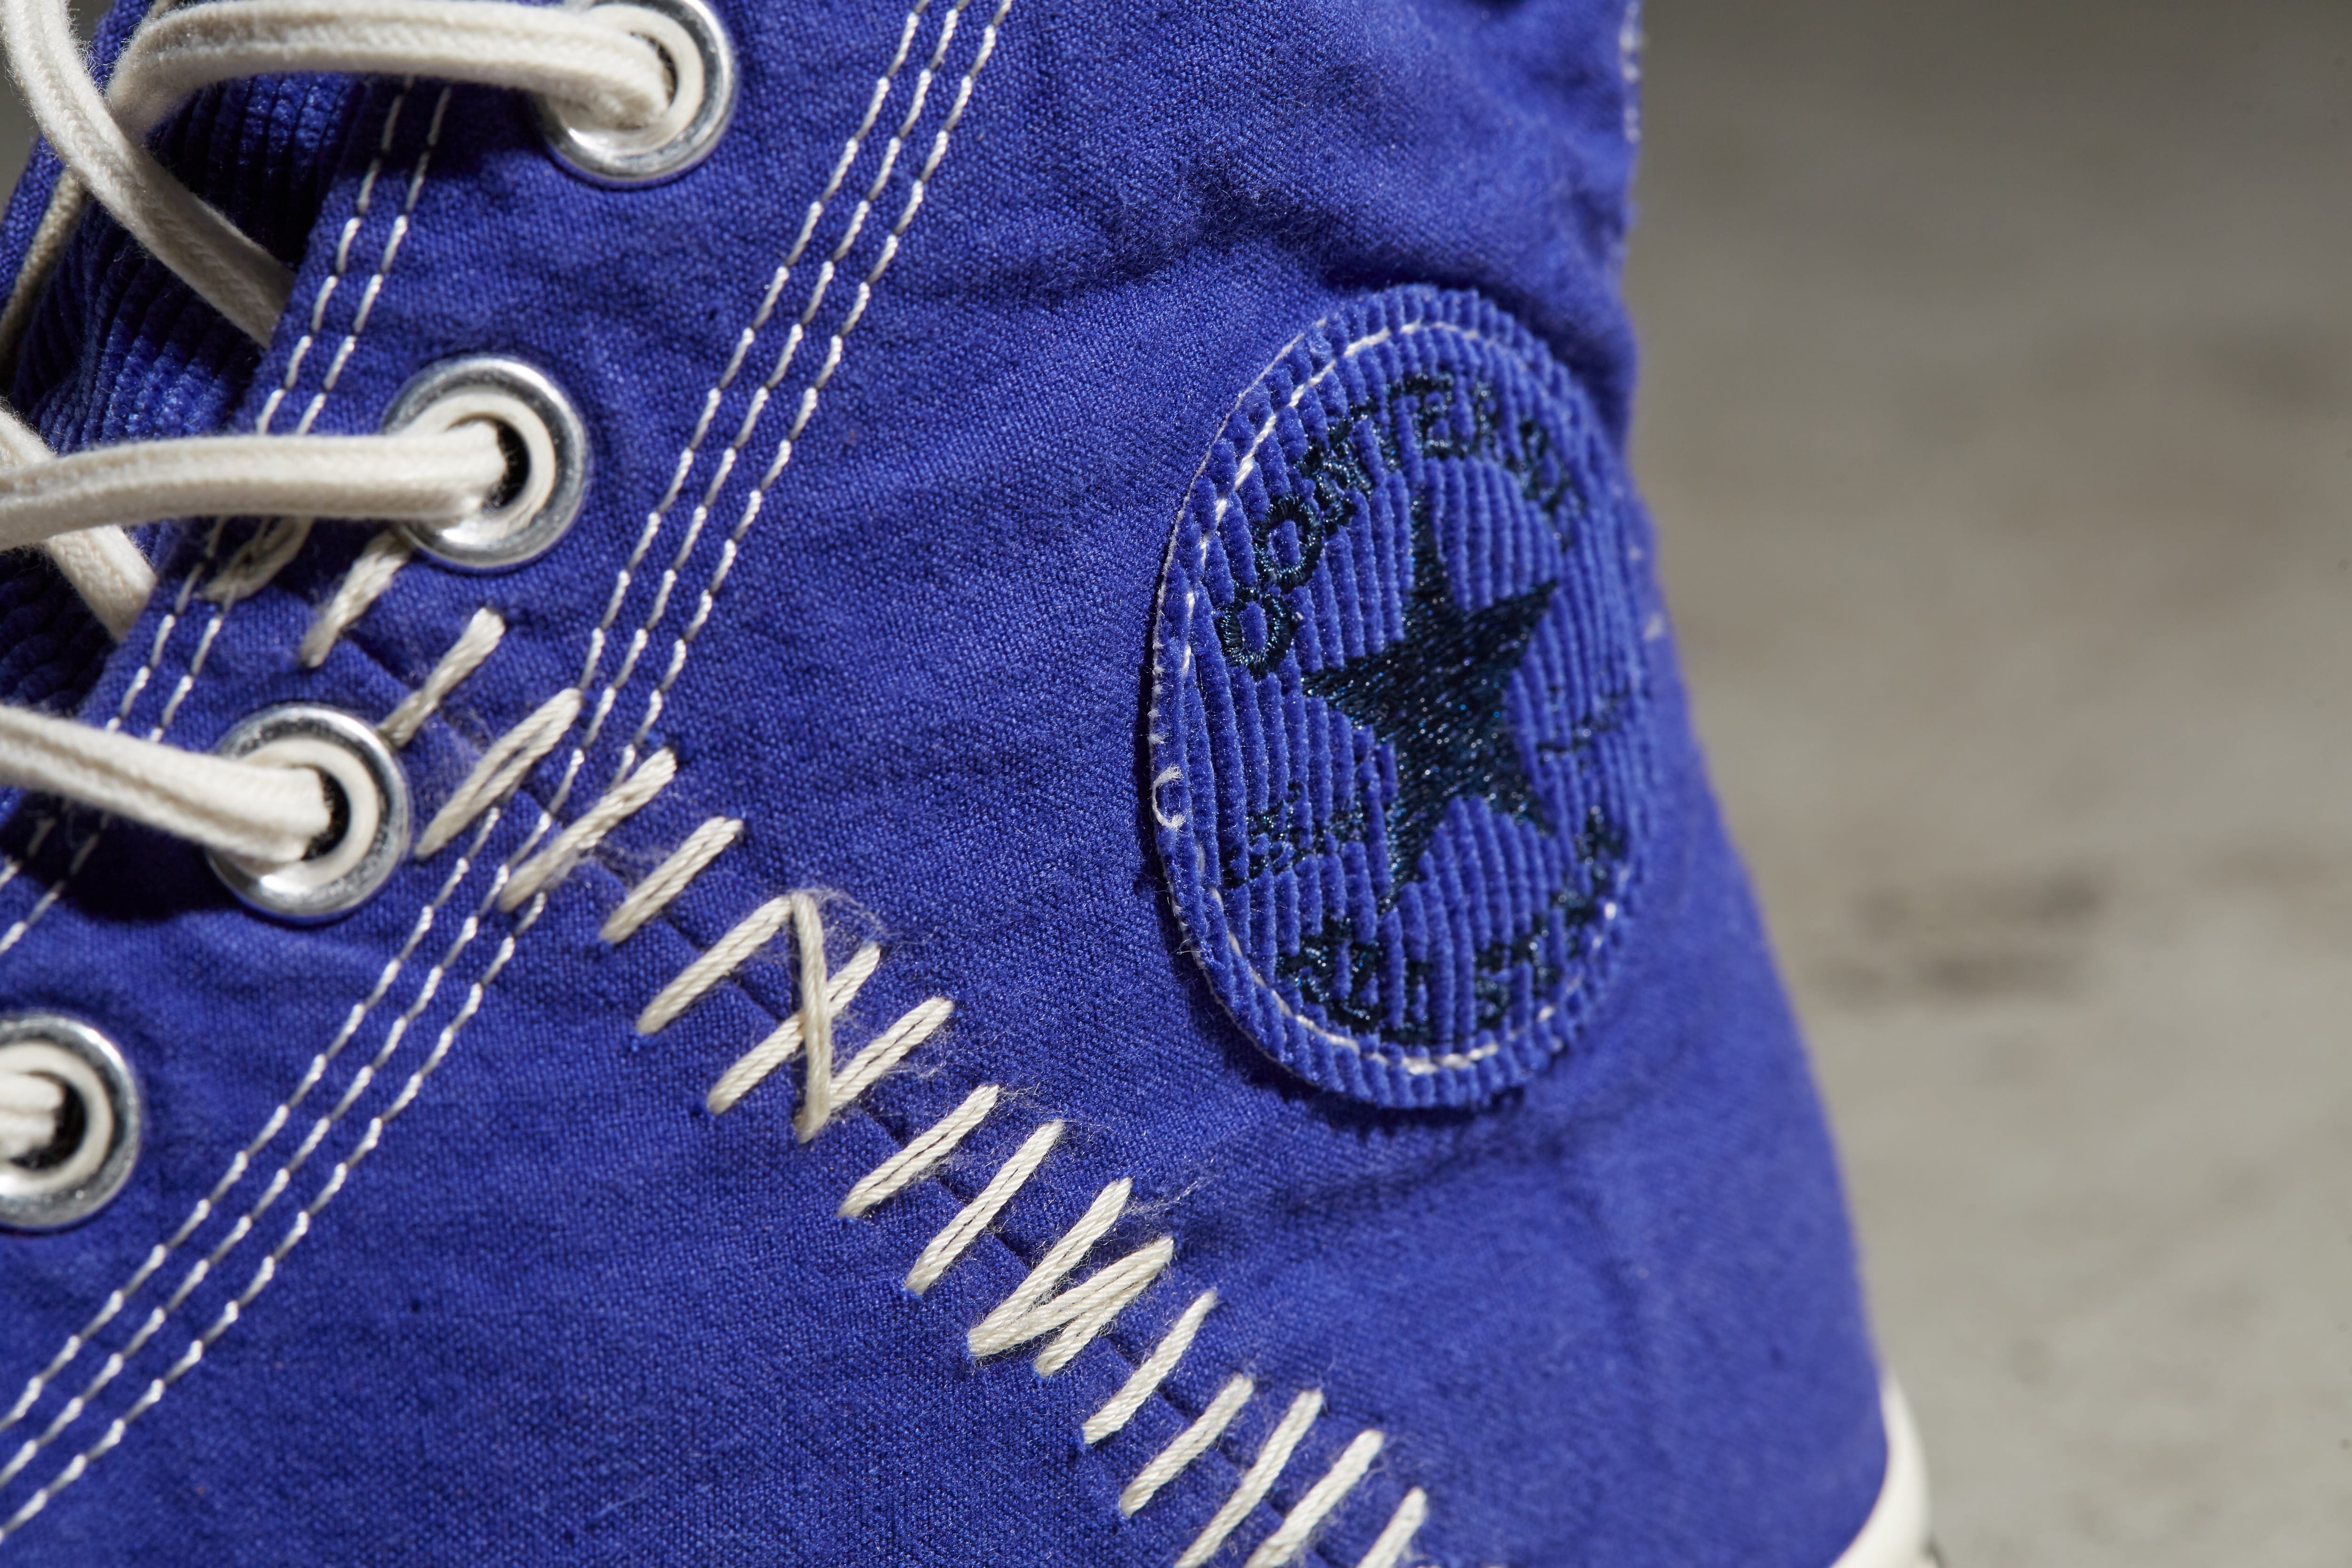 converse chuck taylor all star 70 french workwear